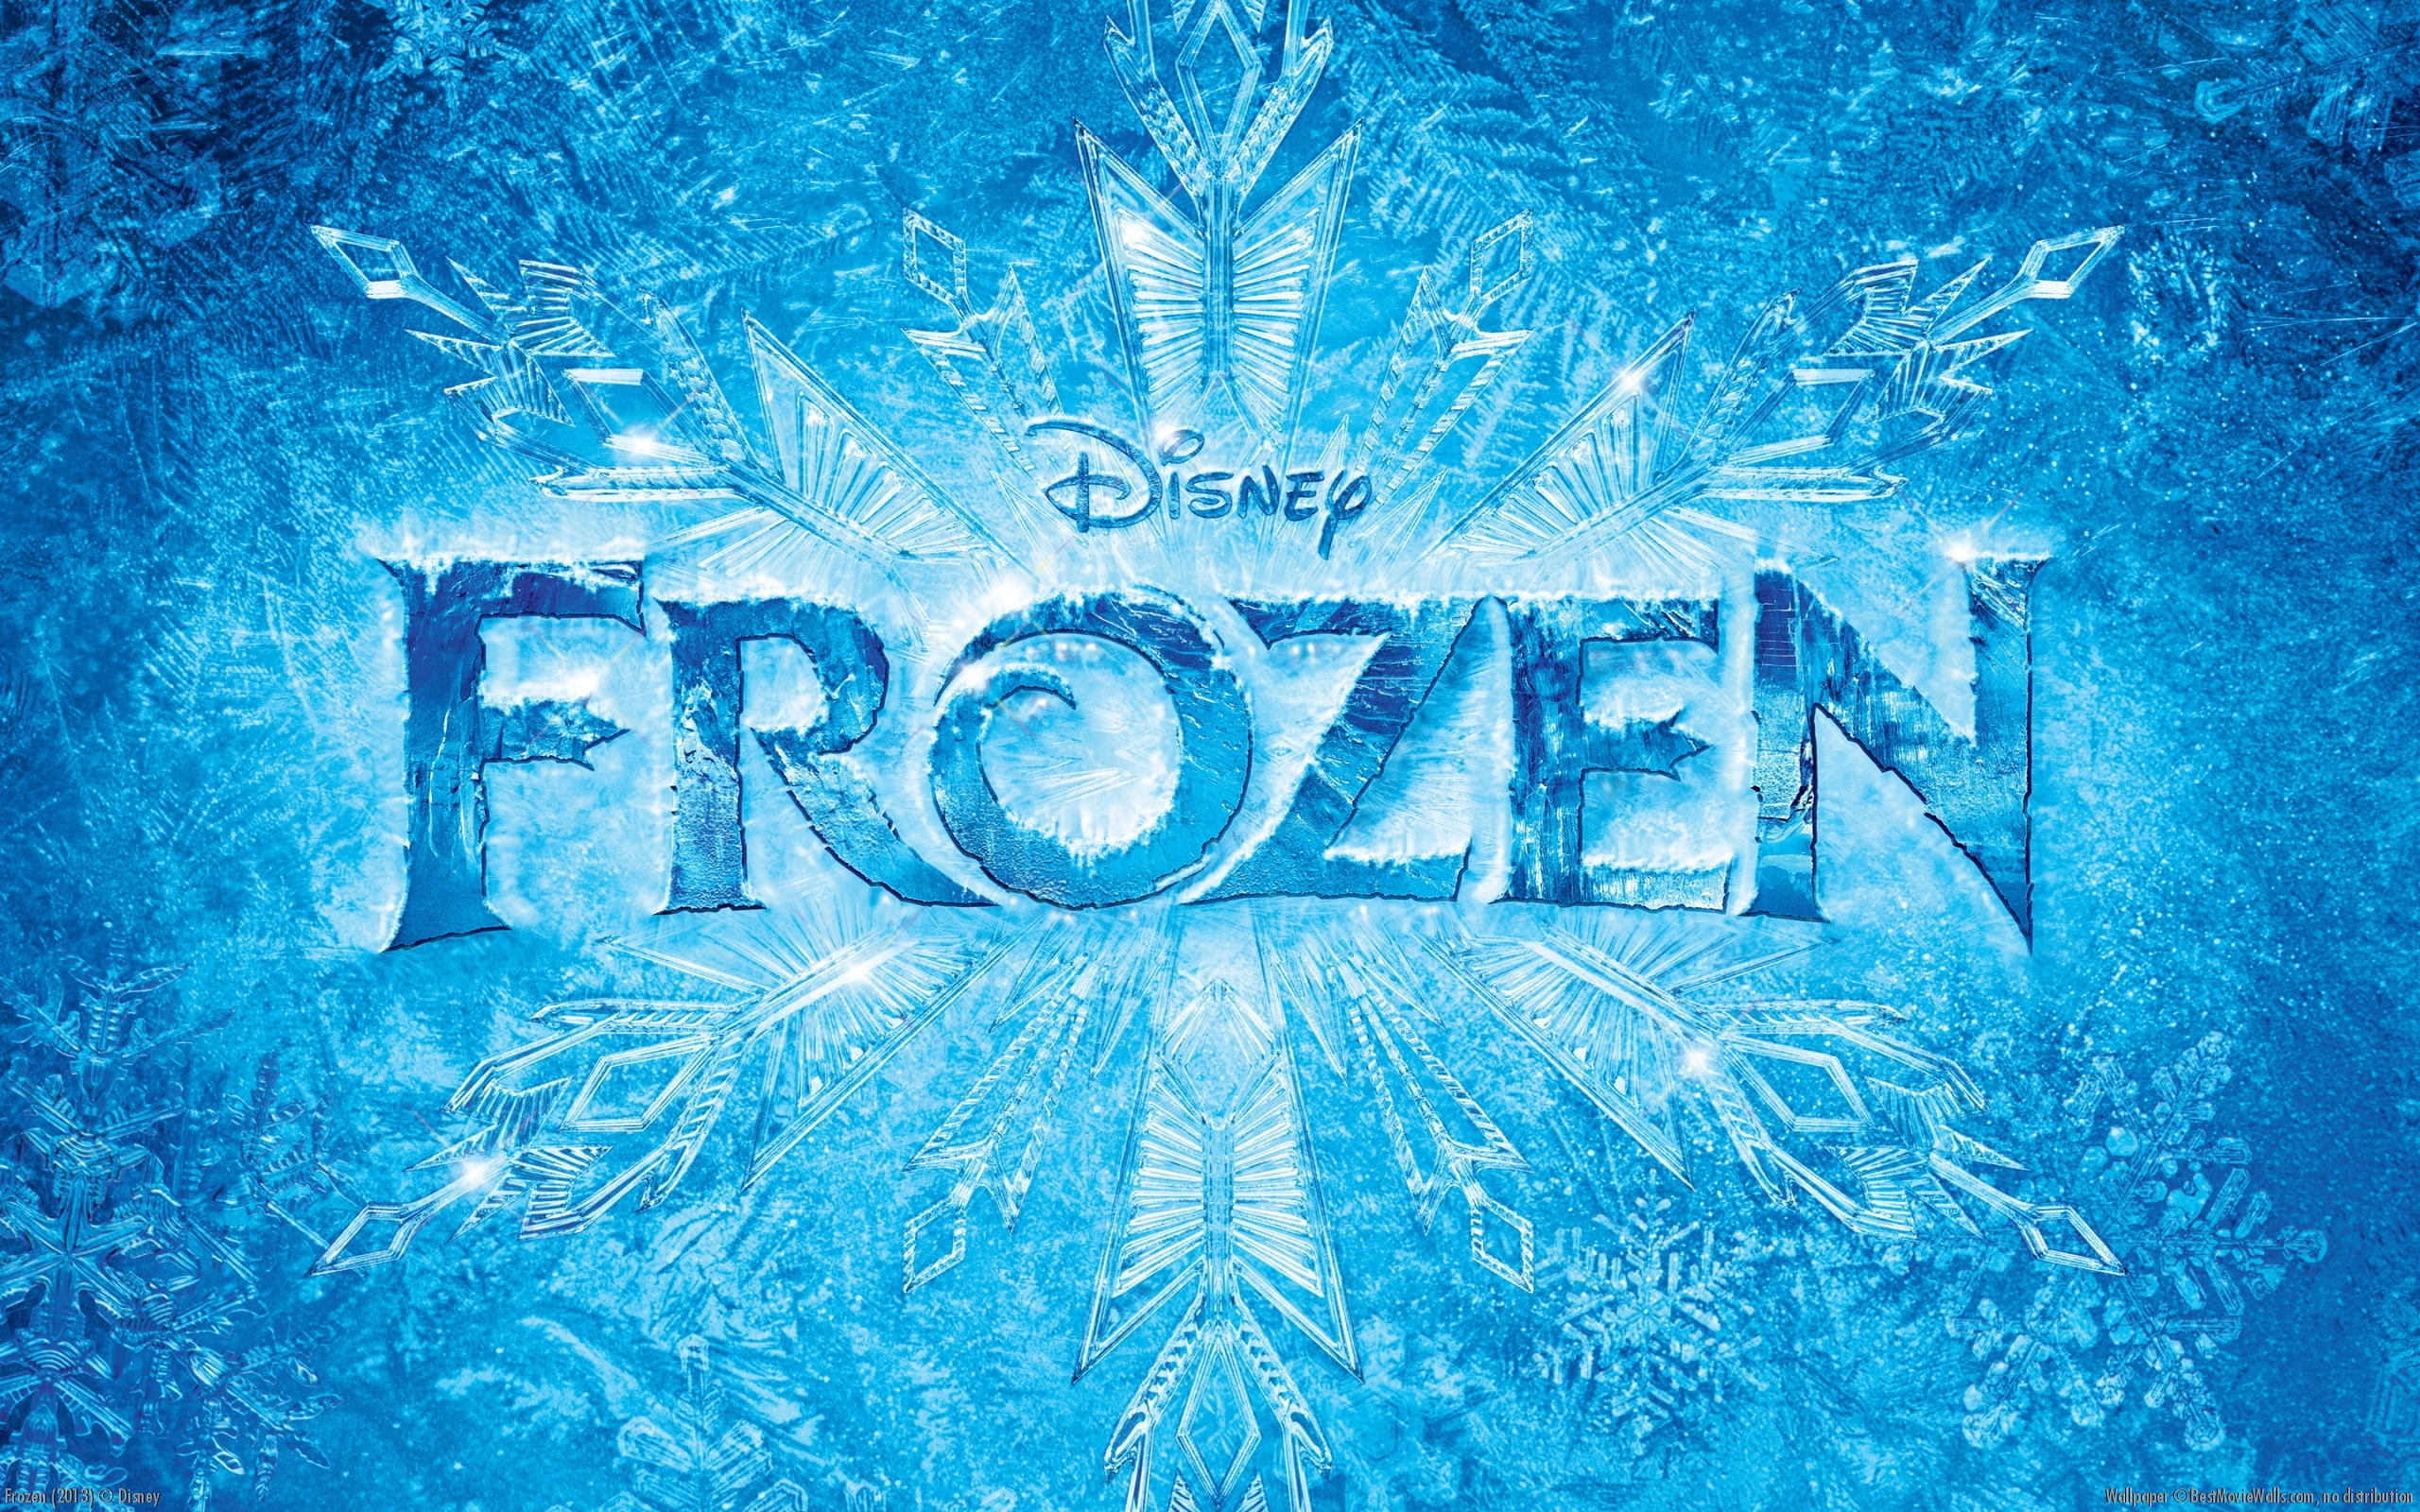 Frozen poster wallpapers and images   wallpapers pictures photos